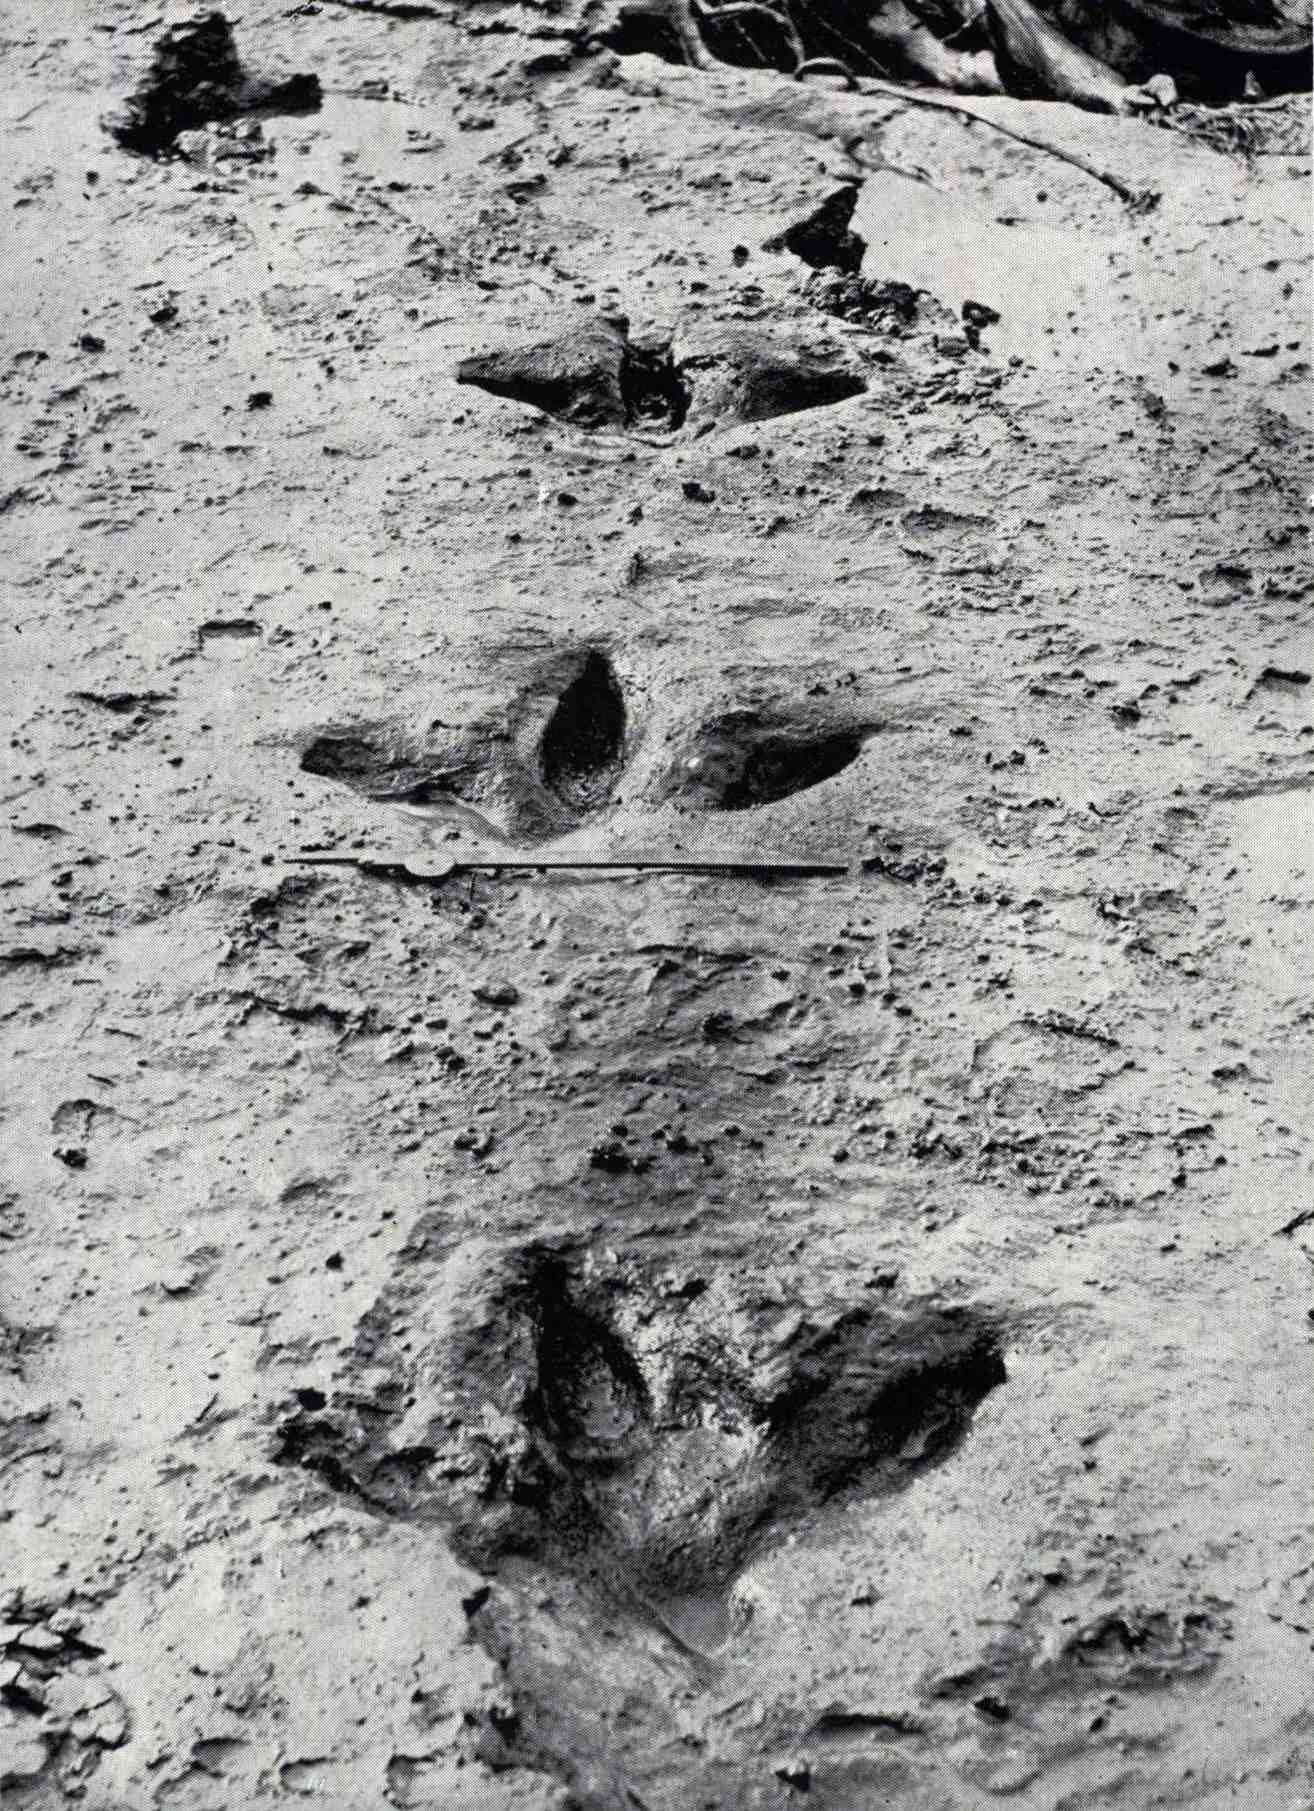 These footprints of Dinornis robustus were exposed in August 1911 when a flood in the Manawatū River swept away the blue clay that had covered and preserved them. They show that the moa had three strong front-pointing toes and, unlike most other ratites, a small rear toe.